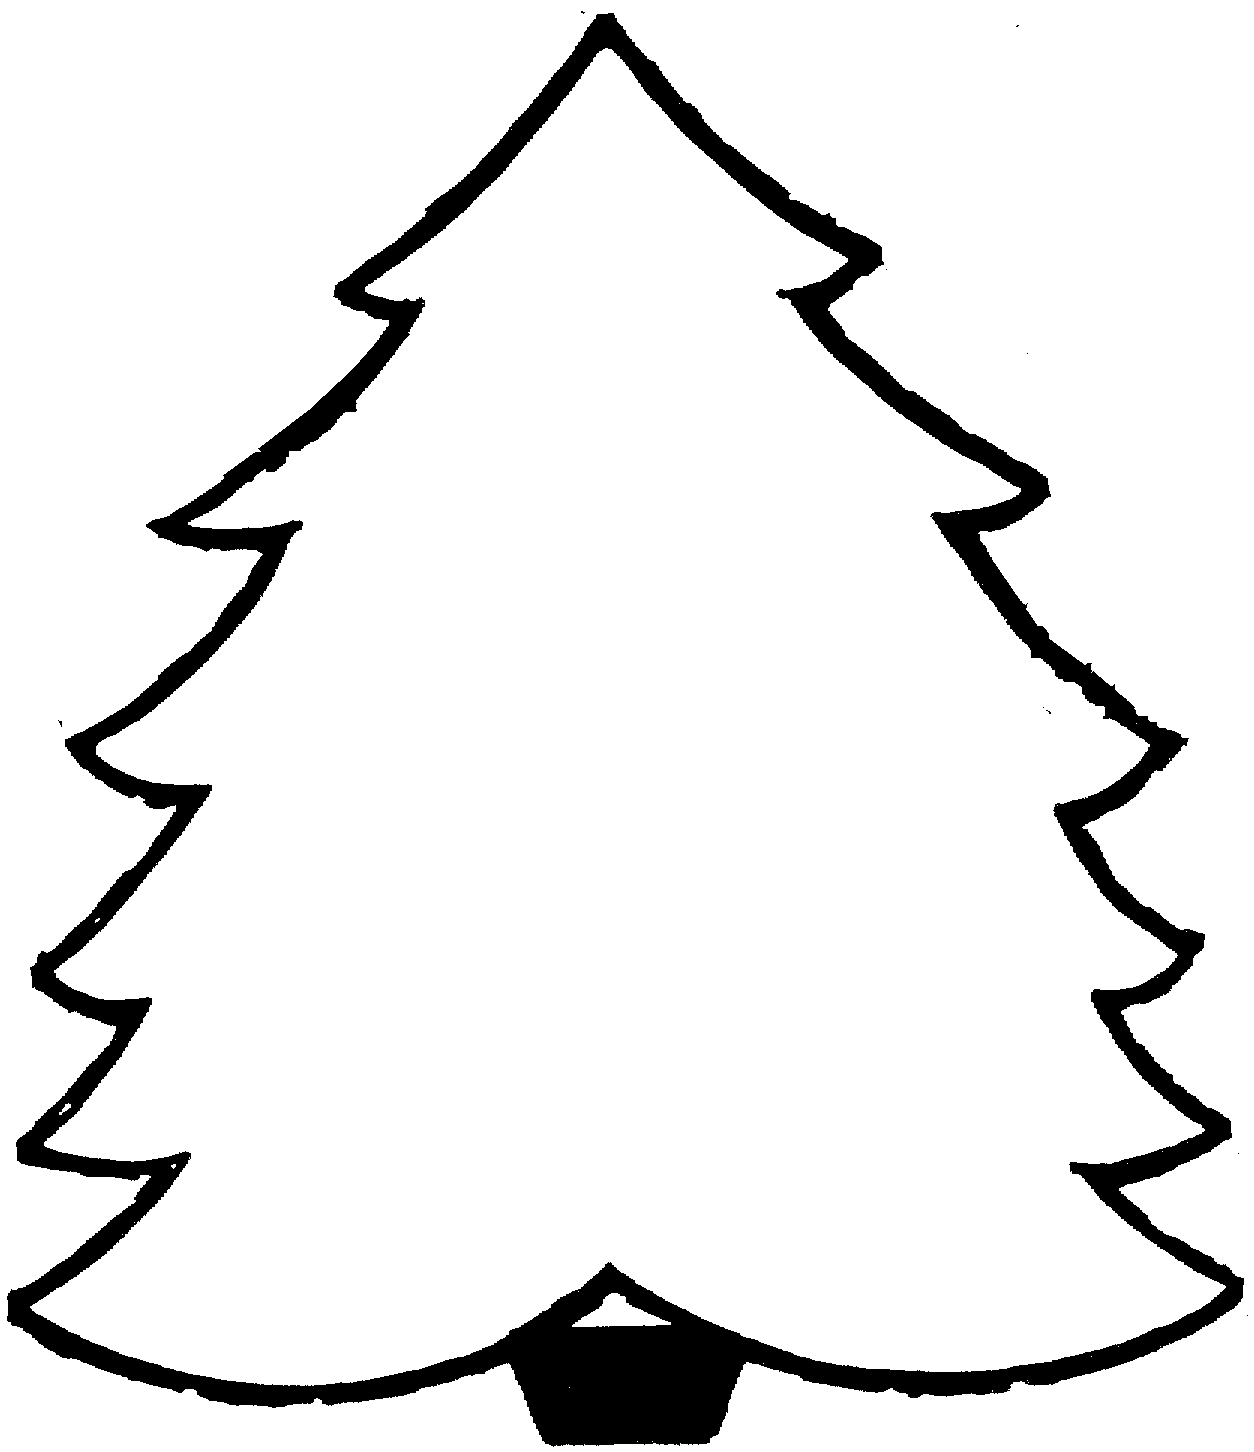 Plain Christmas Tree Coloring Page - Printable Free Coloring Pages